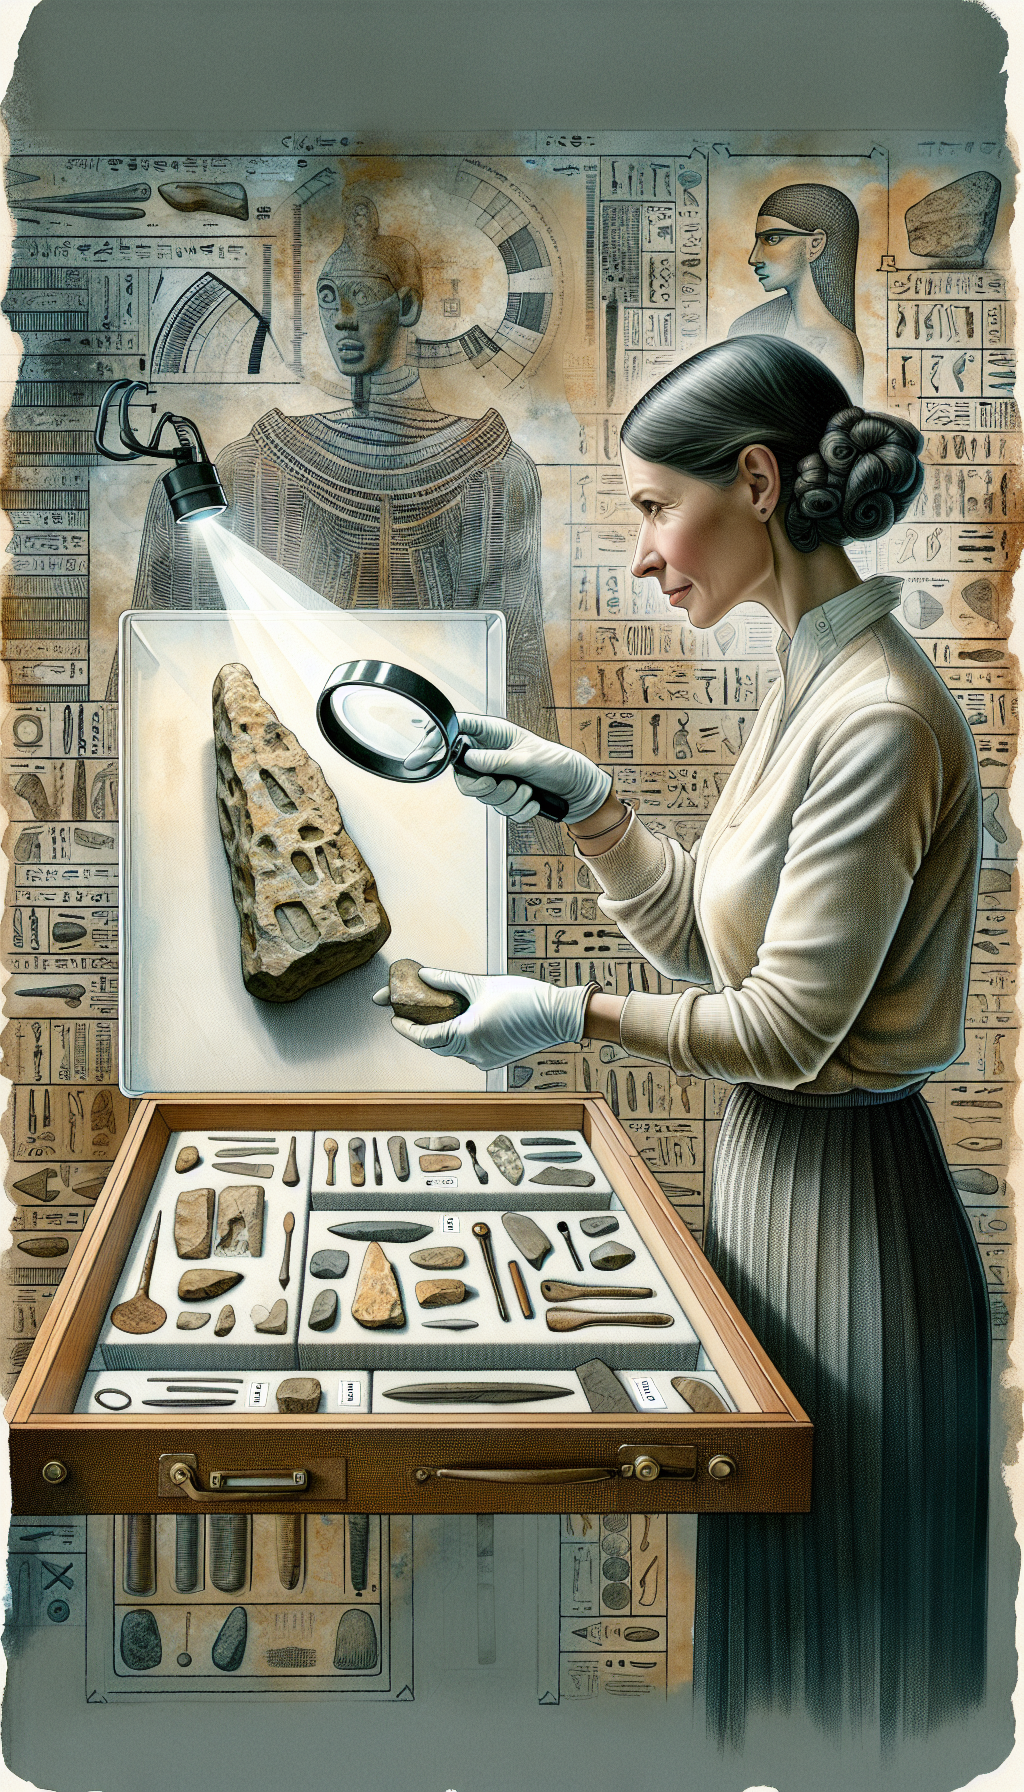 An illustration depicts an archivist's gloved hands gently holding a labeled ancient stone tool above a layered display box. Each layer signifies different maintenance tips, while a magnifying glass hovers over the tool, with labels pointing out its historical features. A faded background shows hieroglyphs, symbolizing the artifact's rich past. The mixed-media style blurs timelines, fusing past and present care techniques.